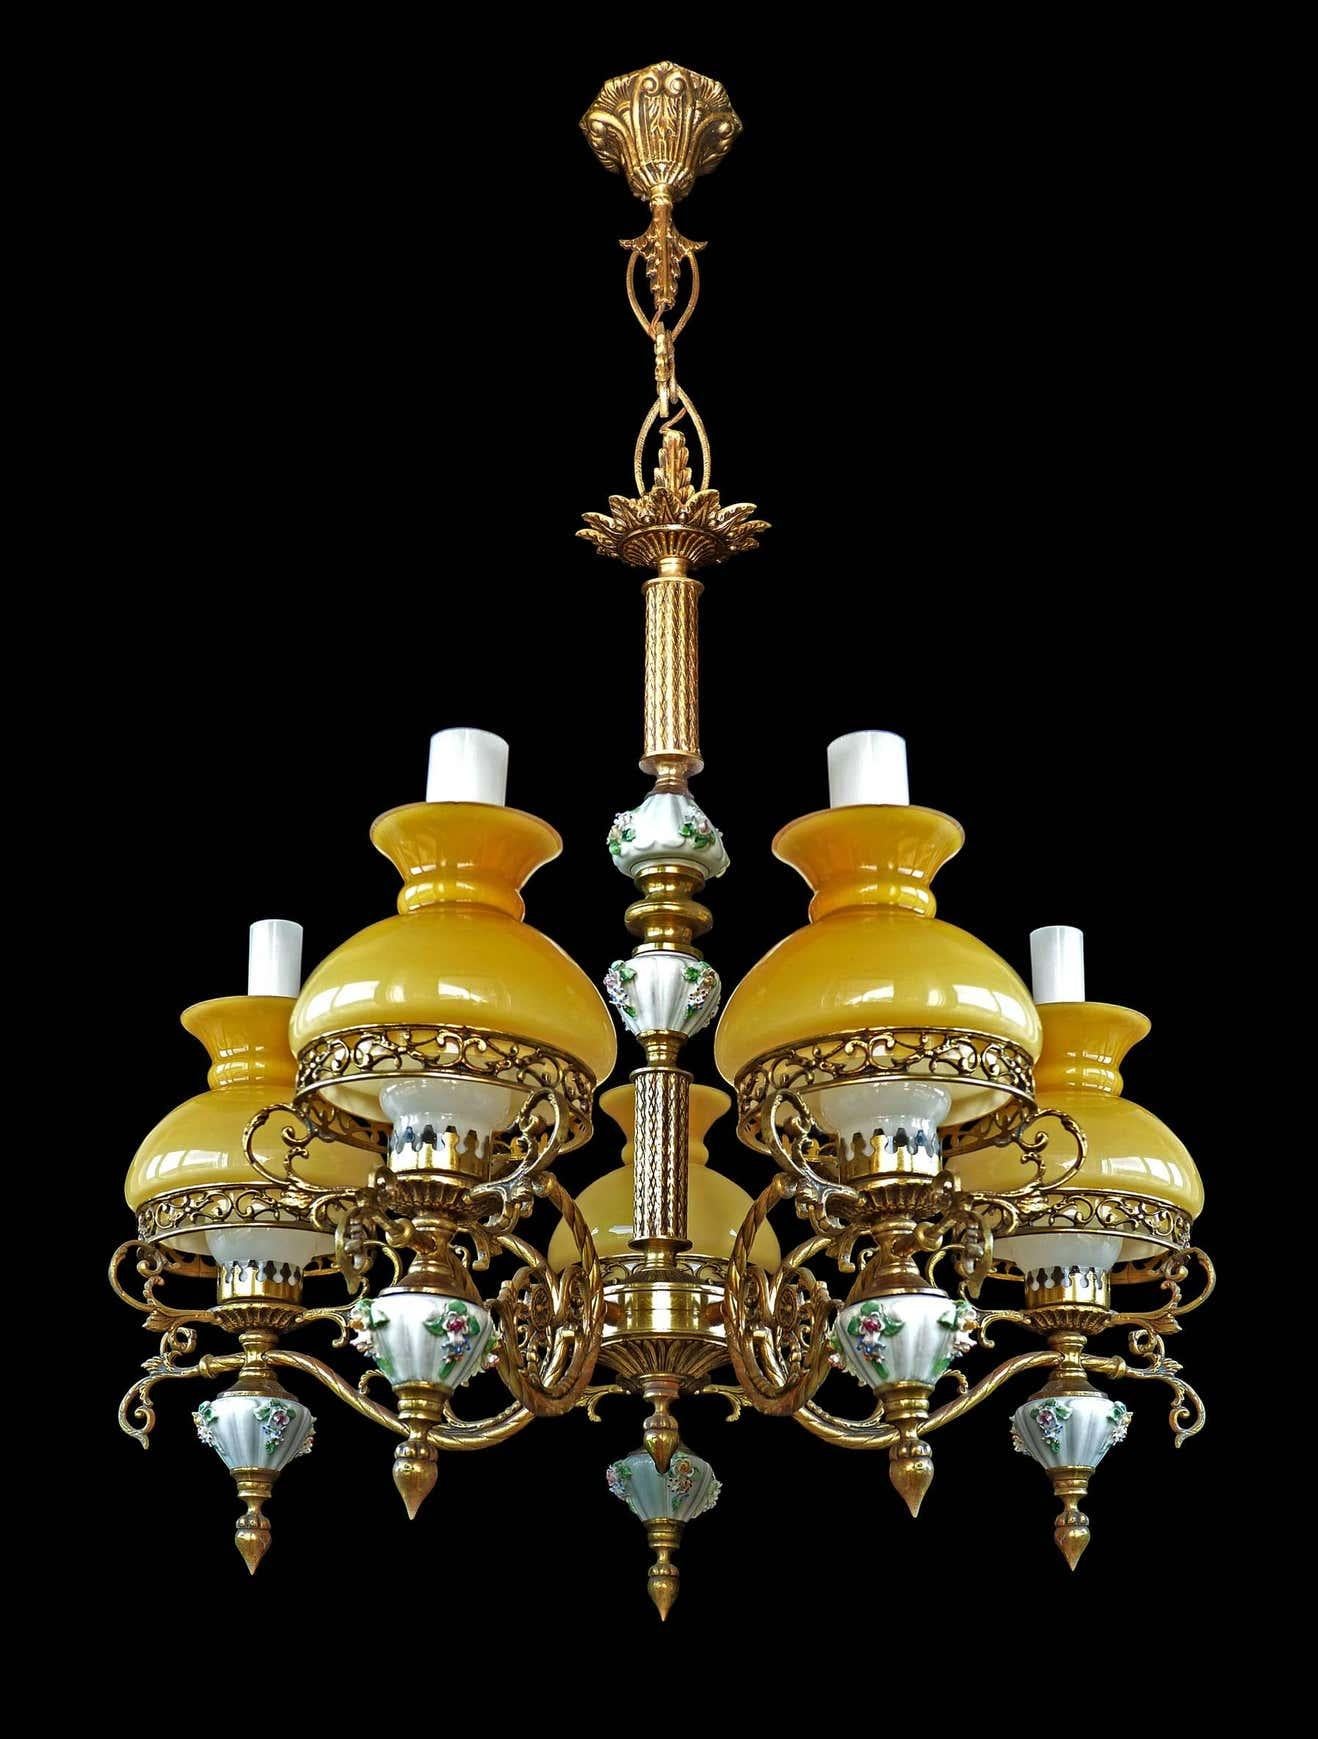 Early Victorian Victorian Chandelier with Porcelain Flowers, Gilt Bronze & Amber Glass Globes